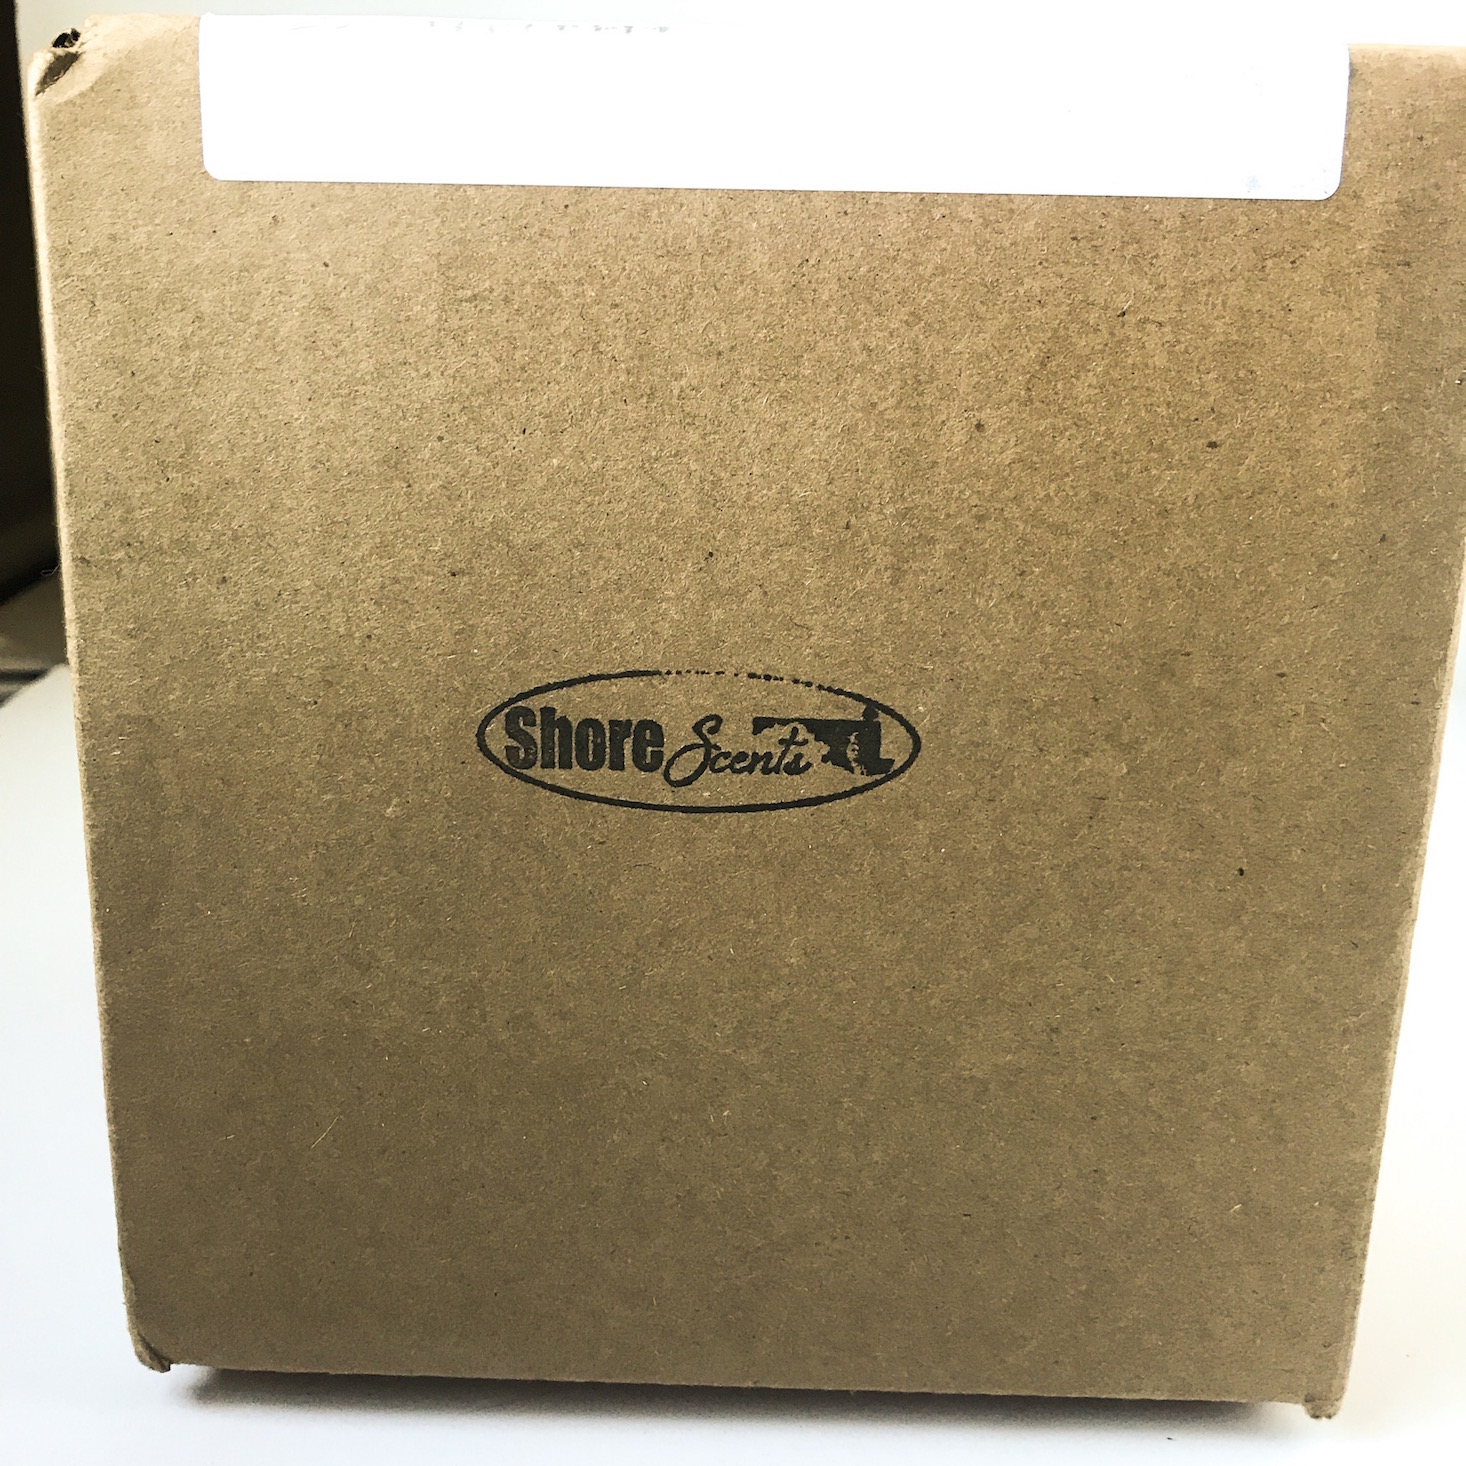 Shore Scents Candle Subscription Review – January 2019